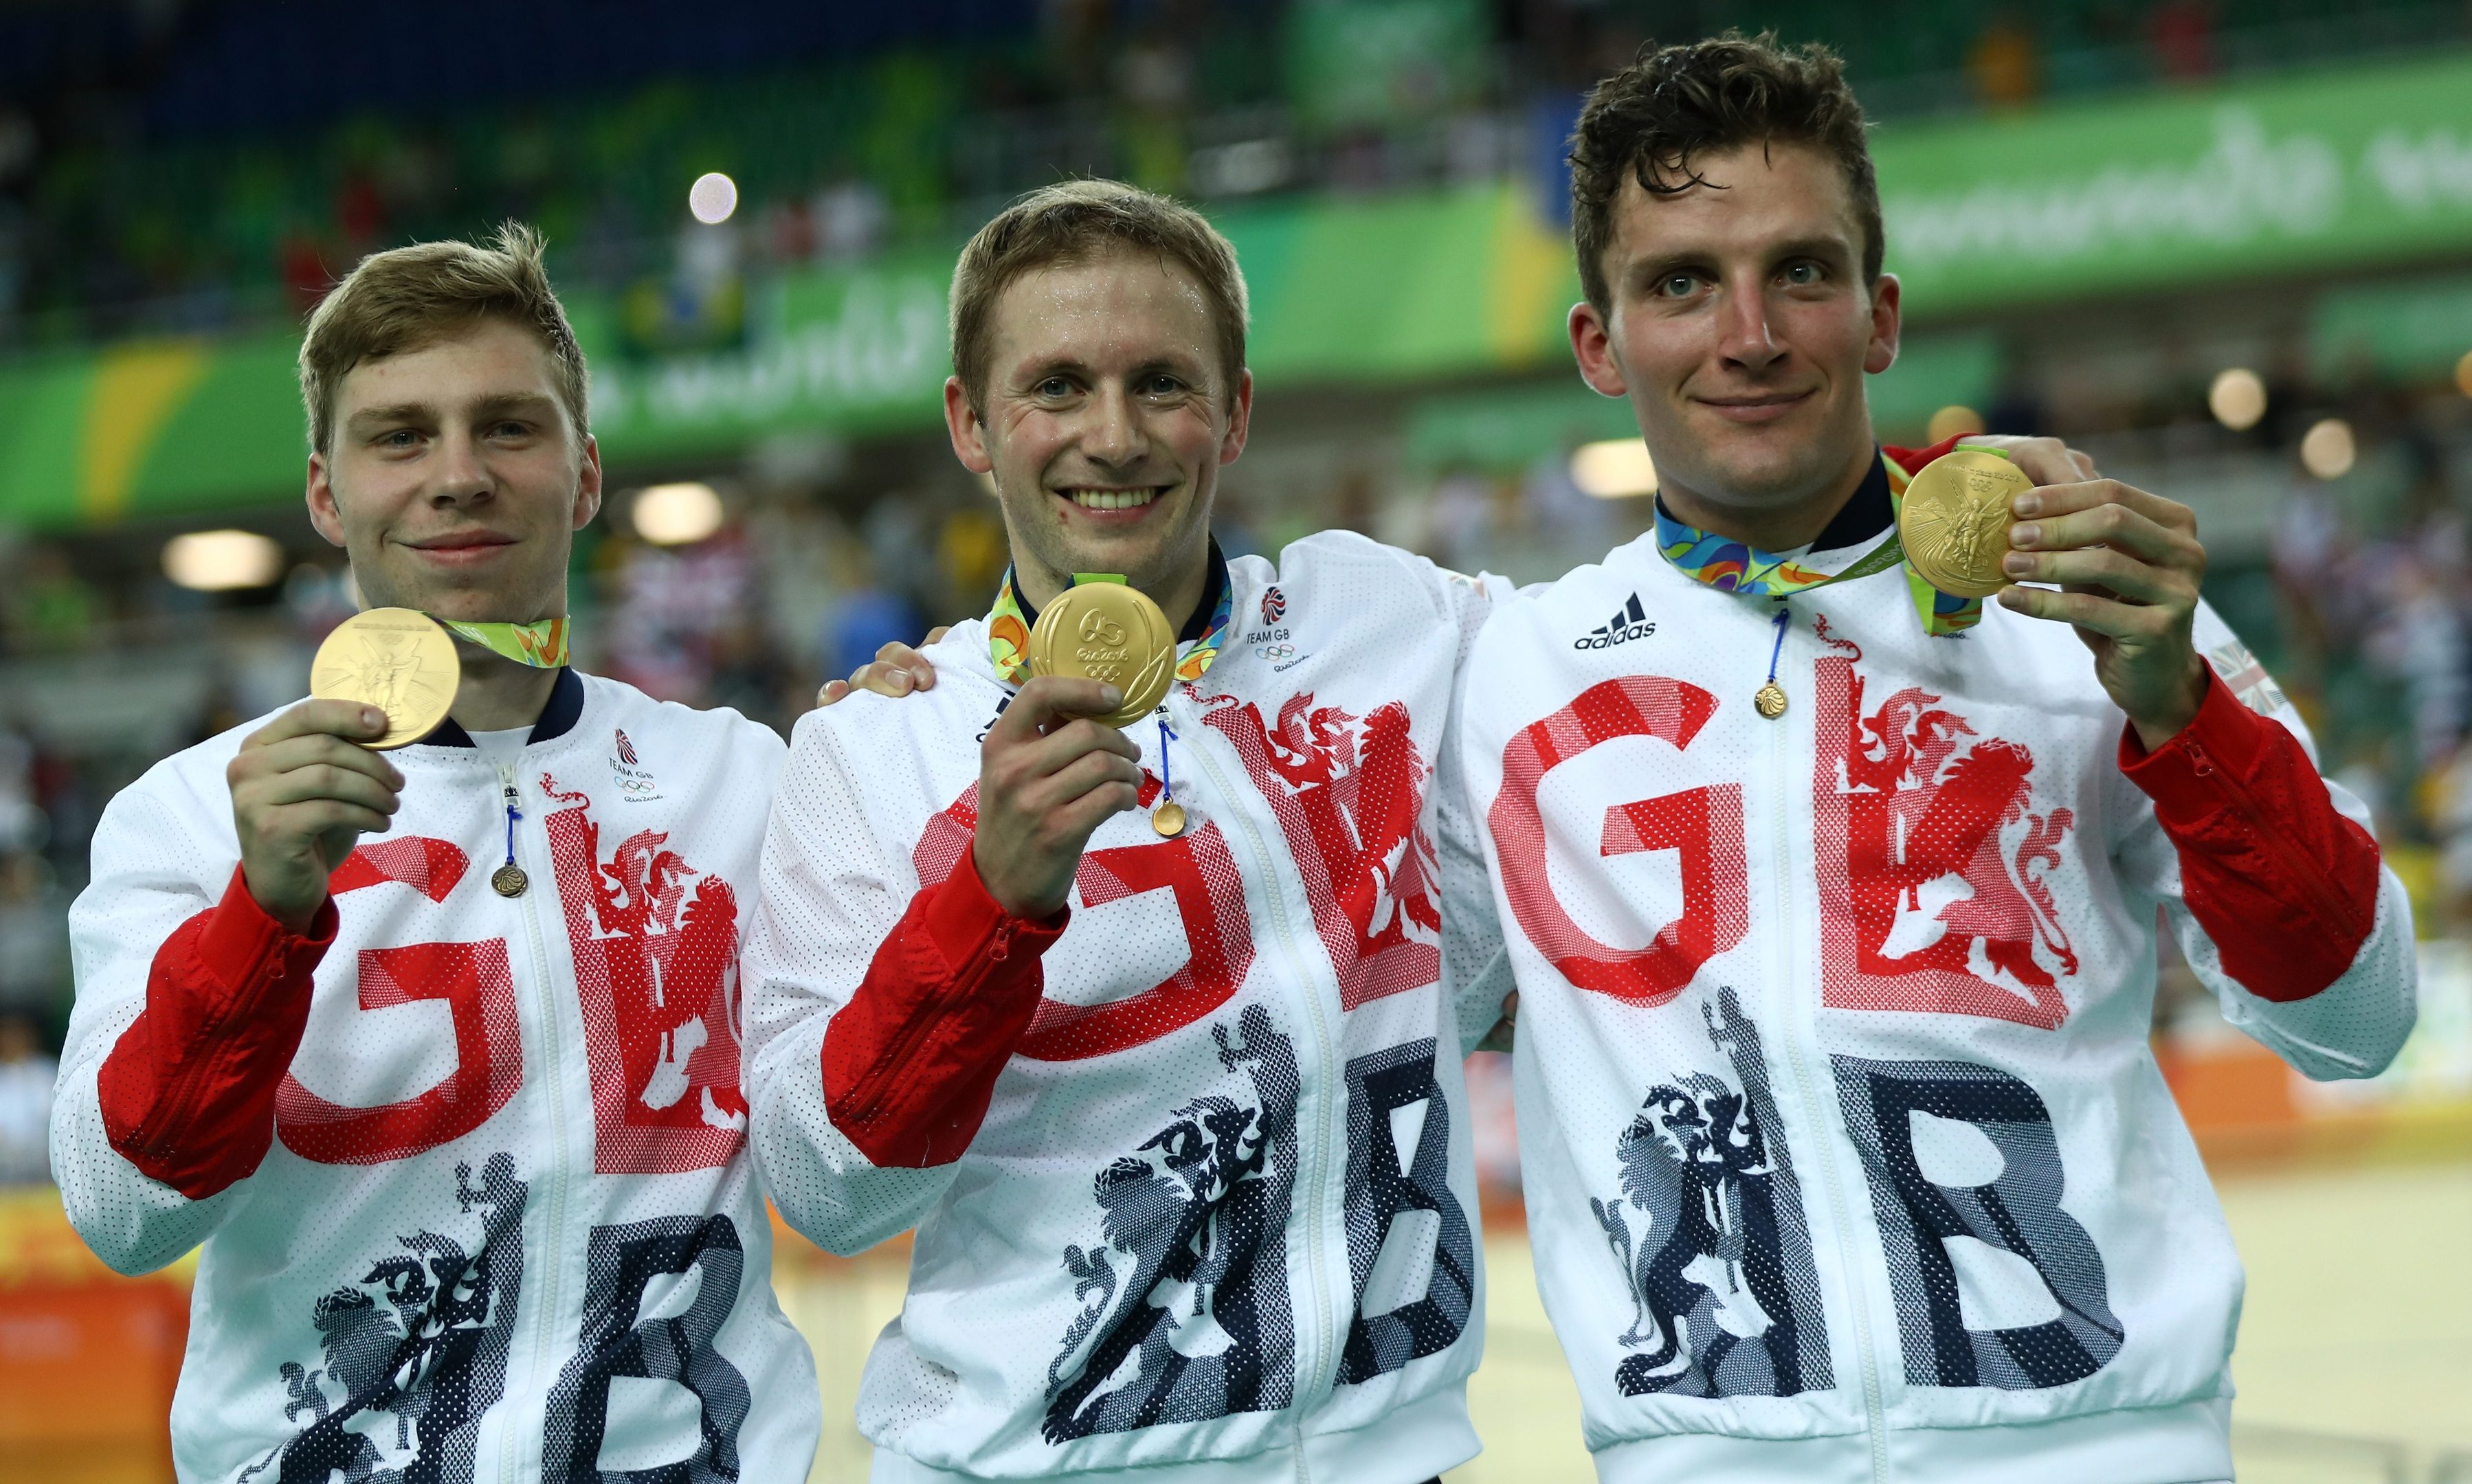 Philip Hindes, Jason Kenny and Callum Skinner with their gold medals.